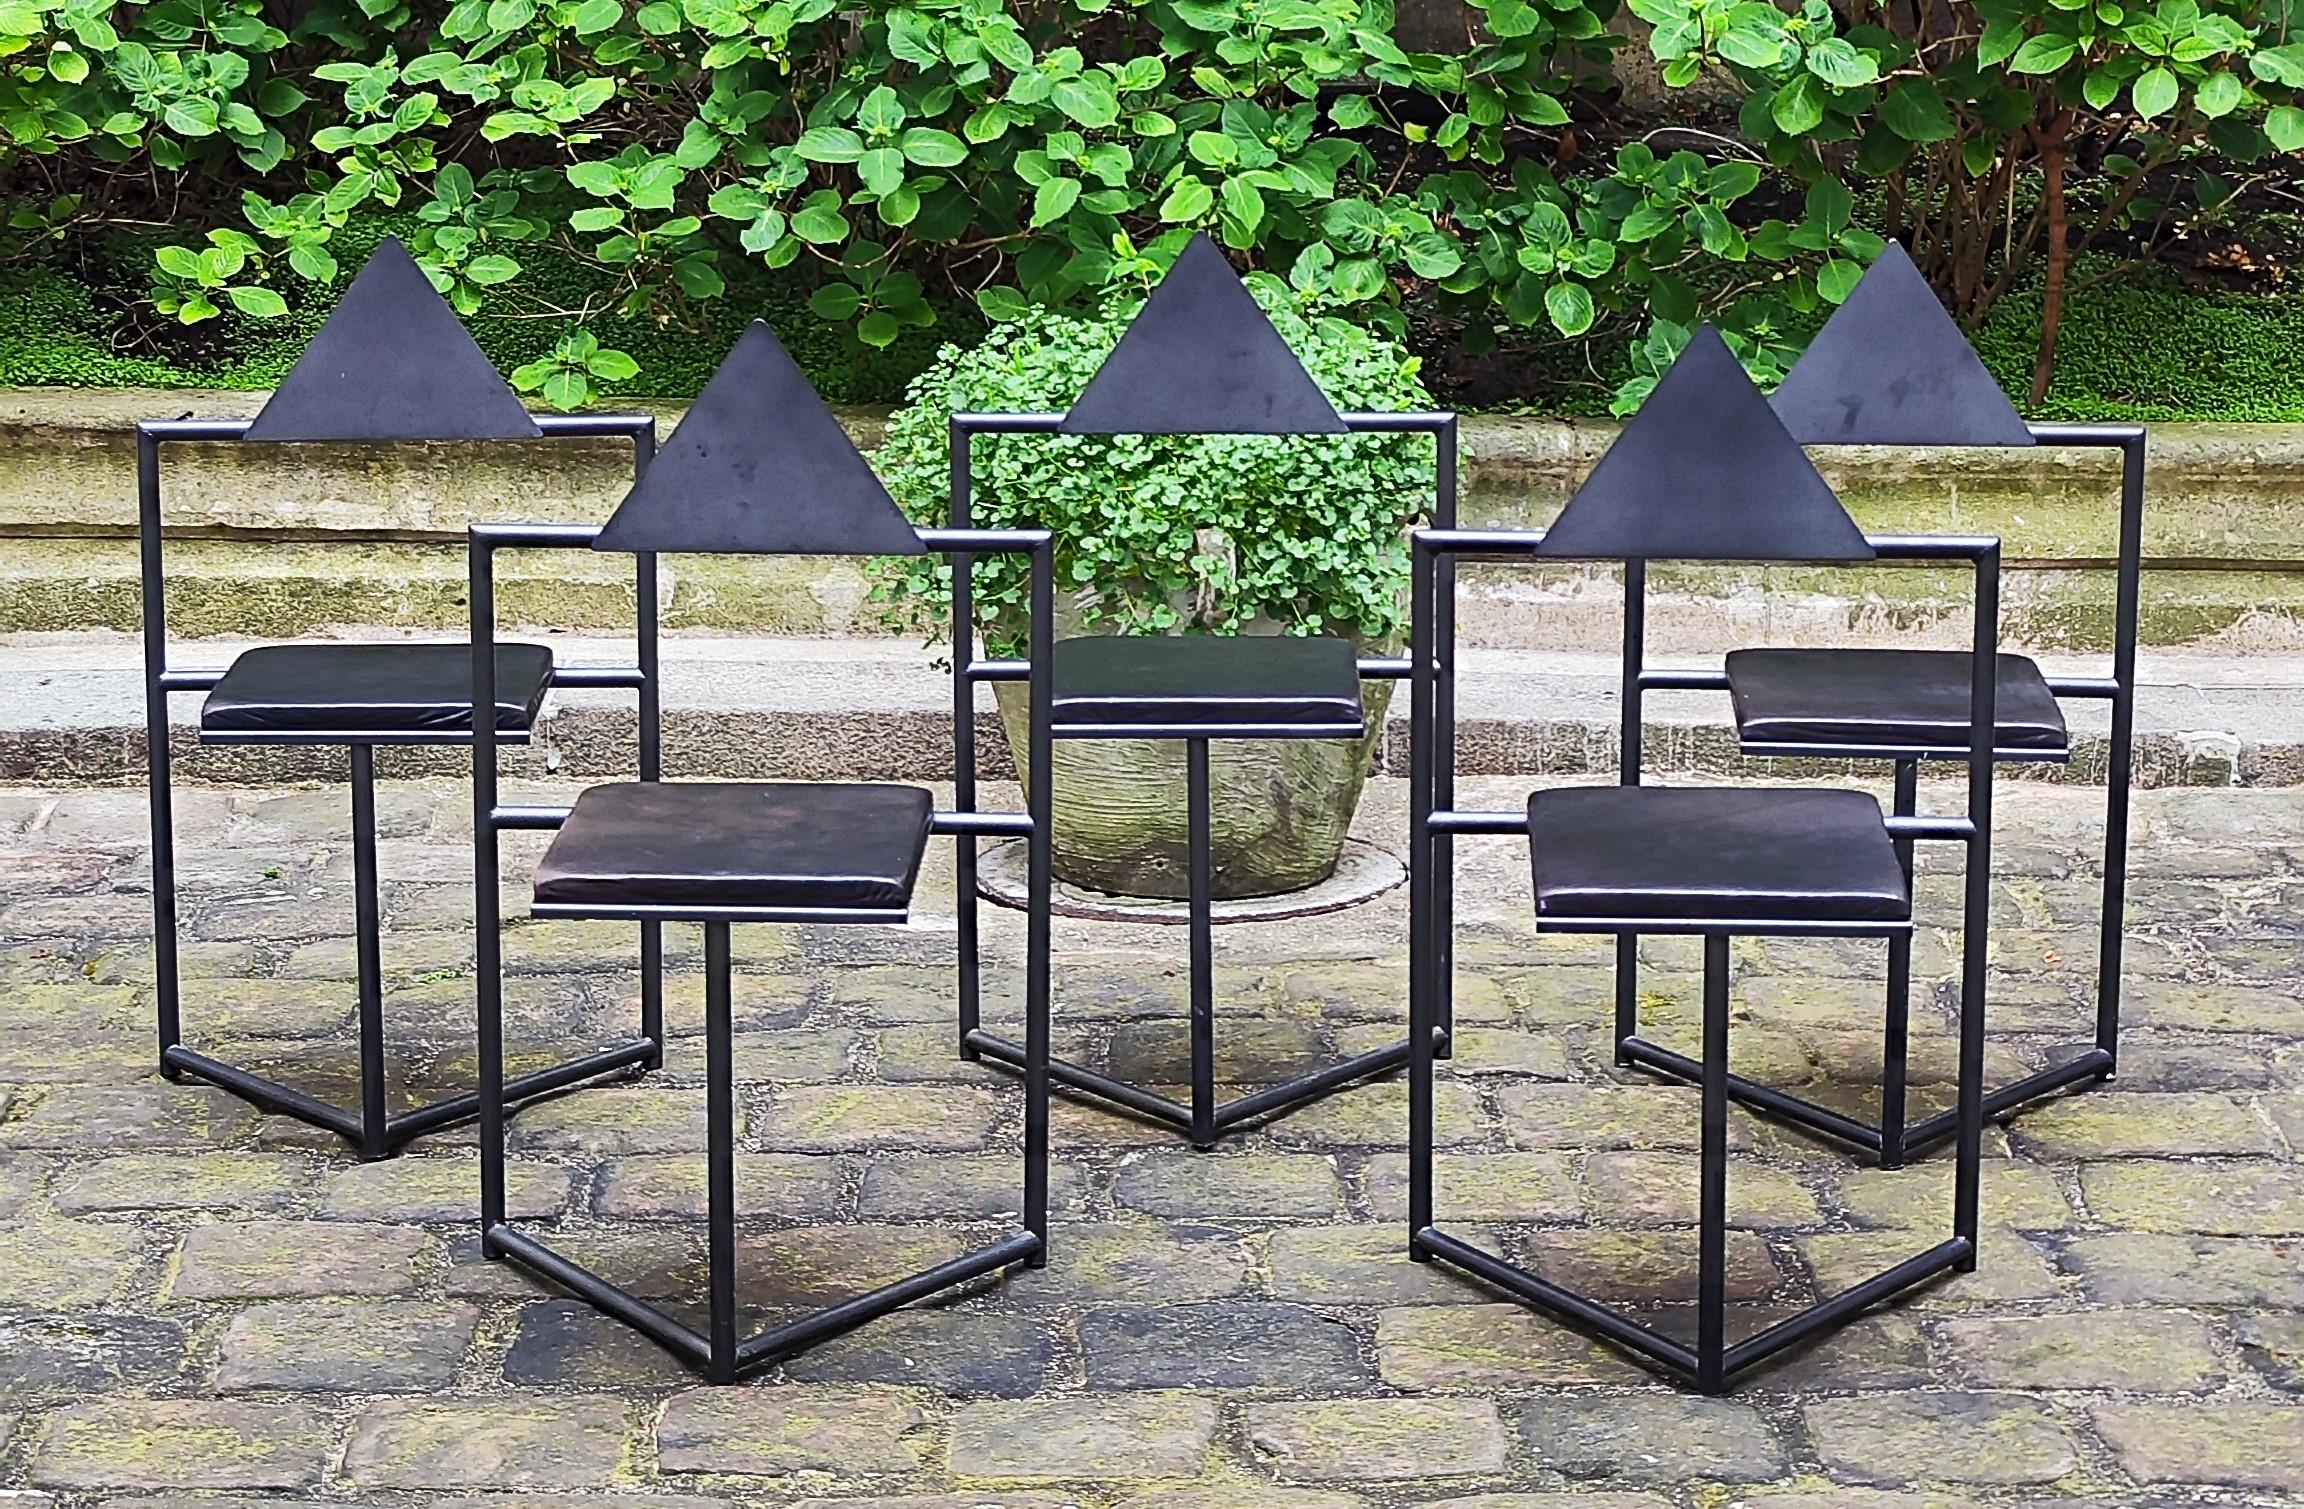 Set of 5 post modern chairs in steel and leather seats, 80s.
.
Unidentified and unattributed but could be from Mario Botta or Martin Szekely, or even Philippe Starck
.
Some traces of use and the leather of the patinated seats worn in places which in